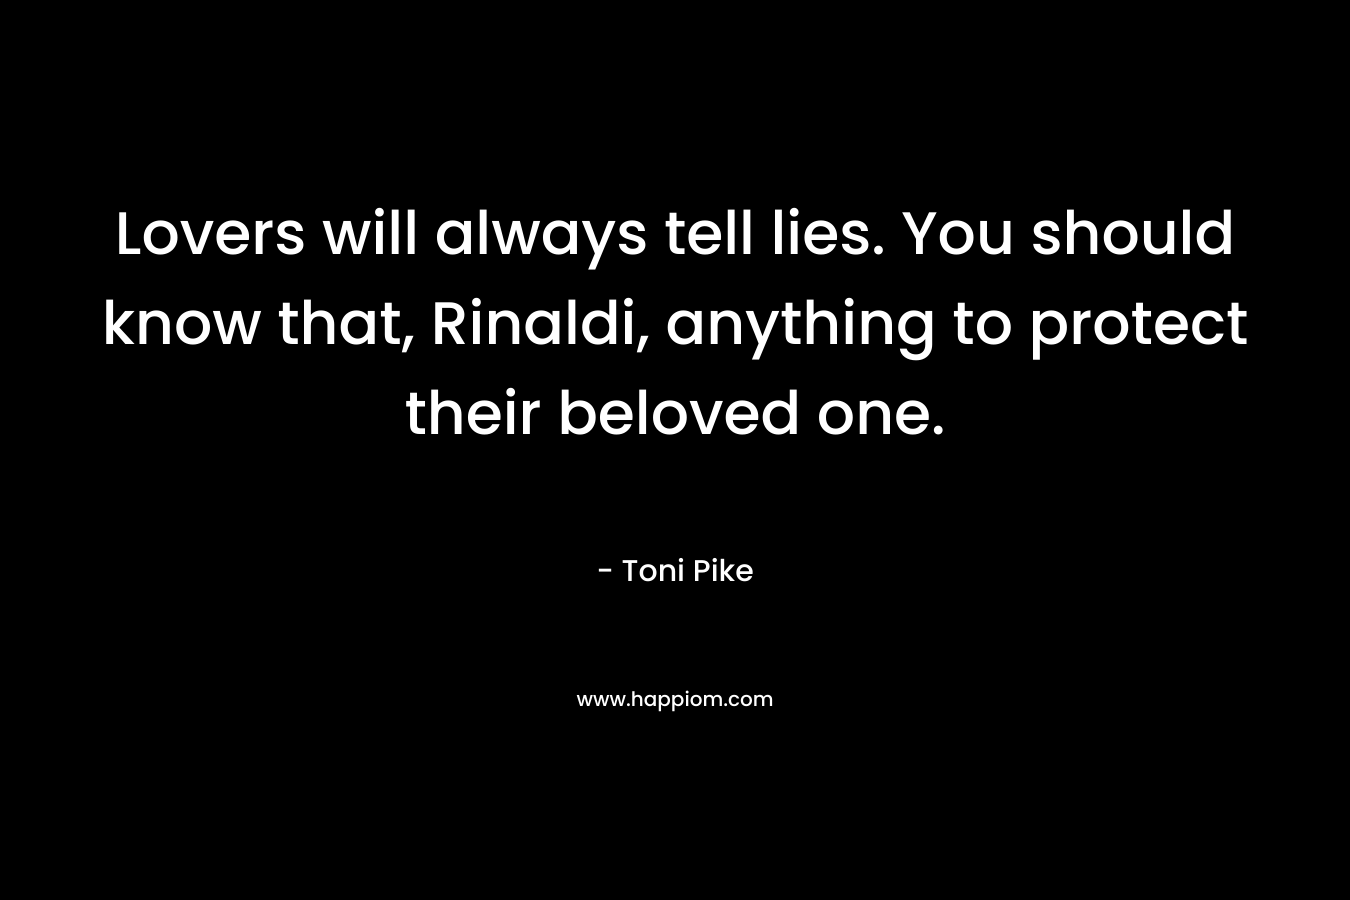 Lovers will always tell lies. You should know that, Rinaldi, anything to protect their beloved one.